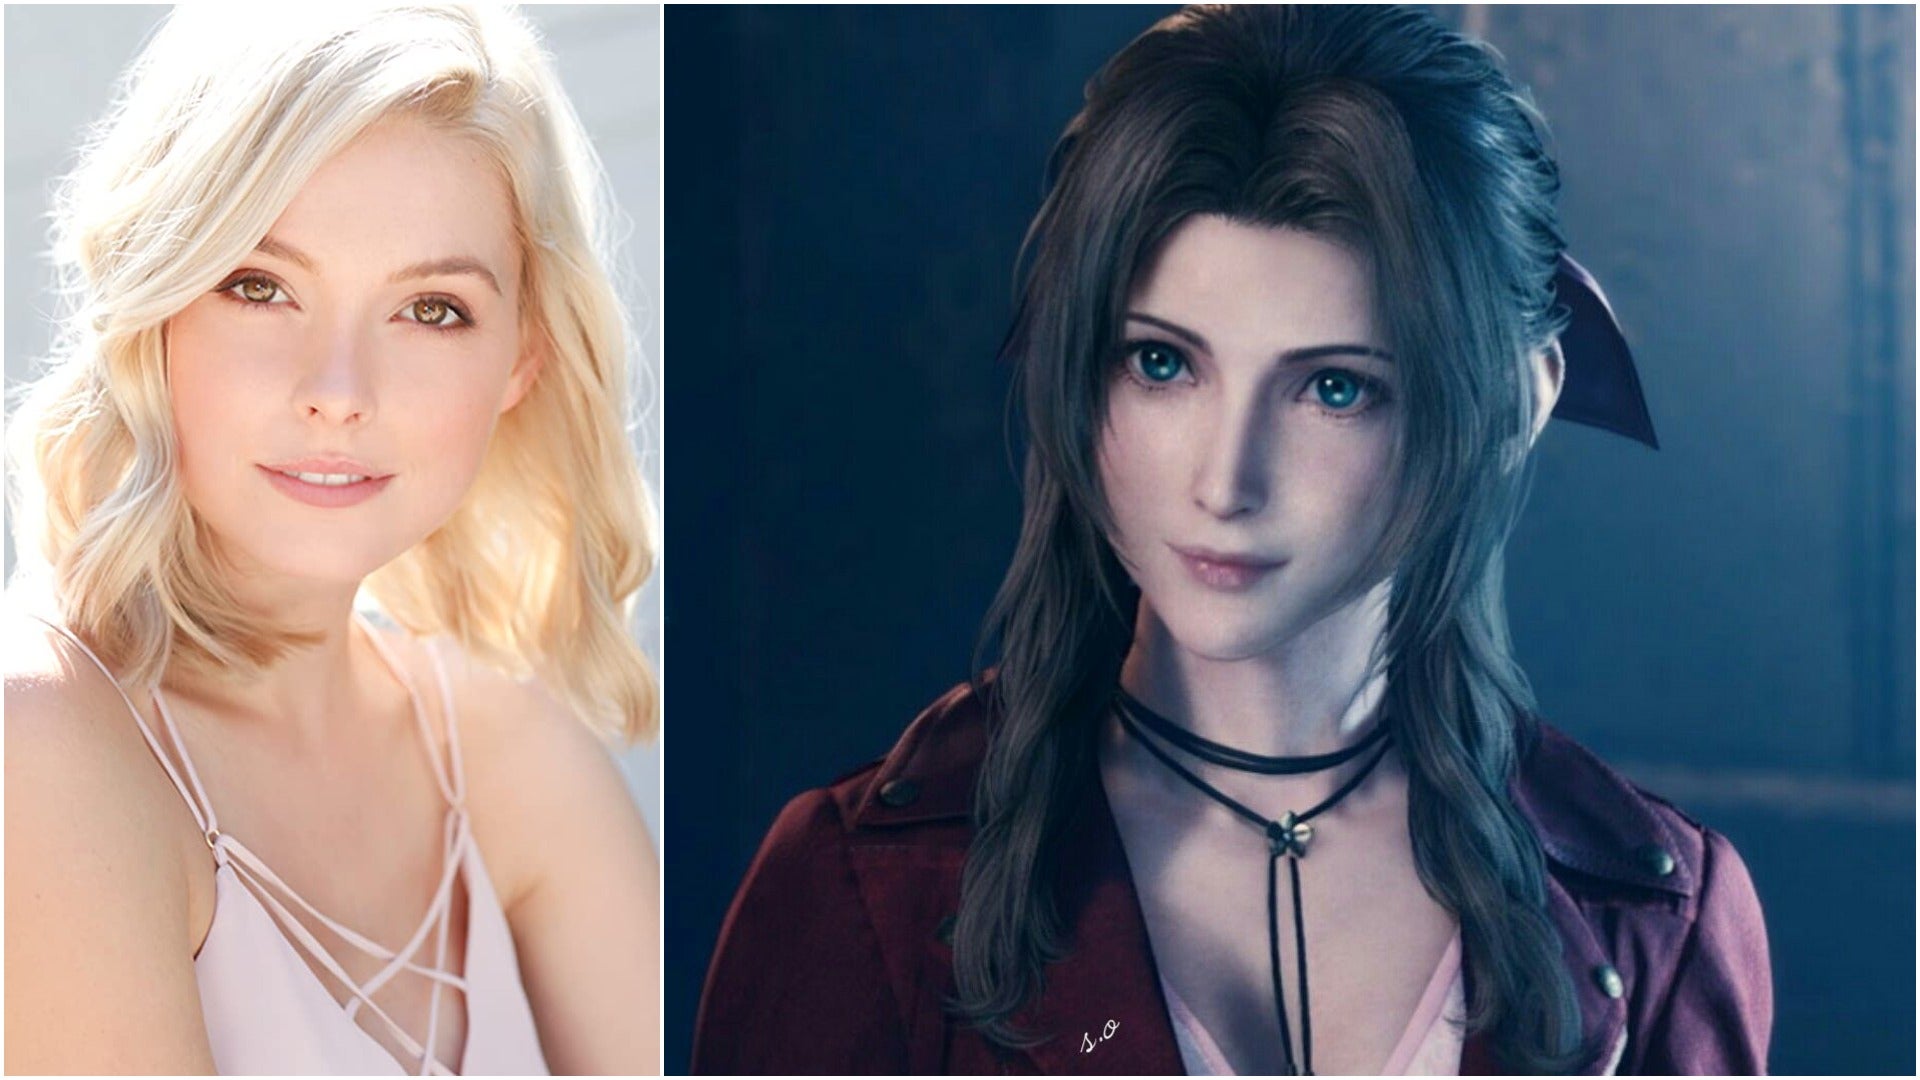 Actress Briana White and Aerith (the character she voices) from Final Fantasy VII: Remake